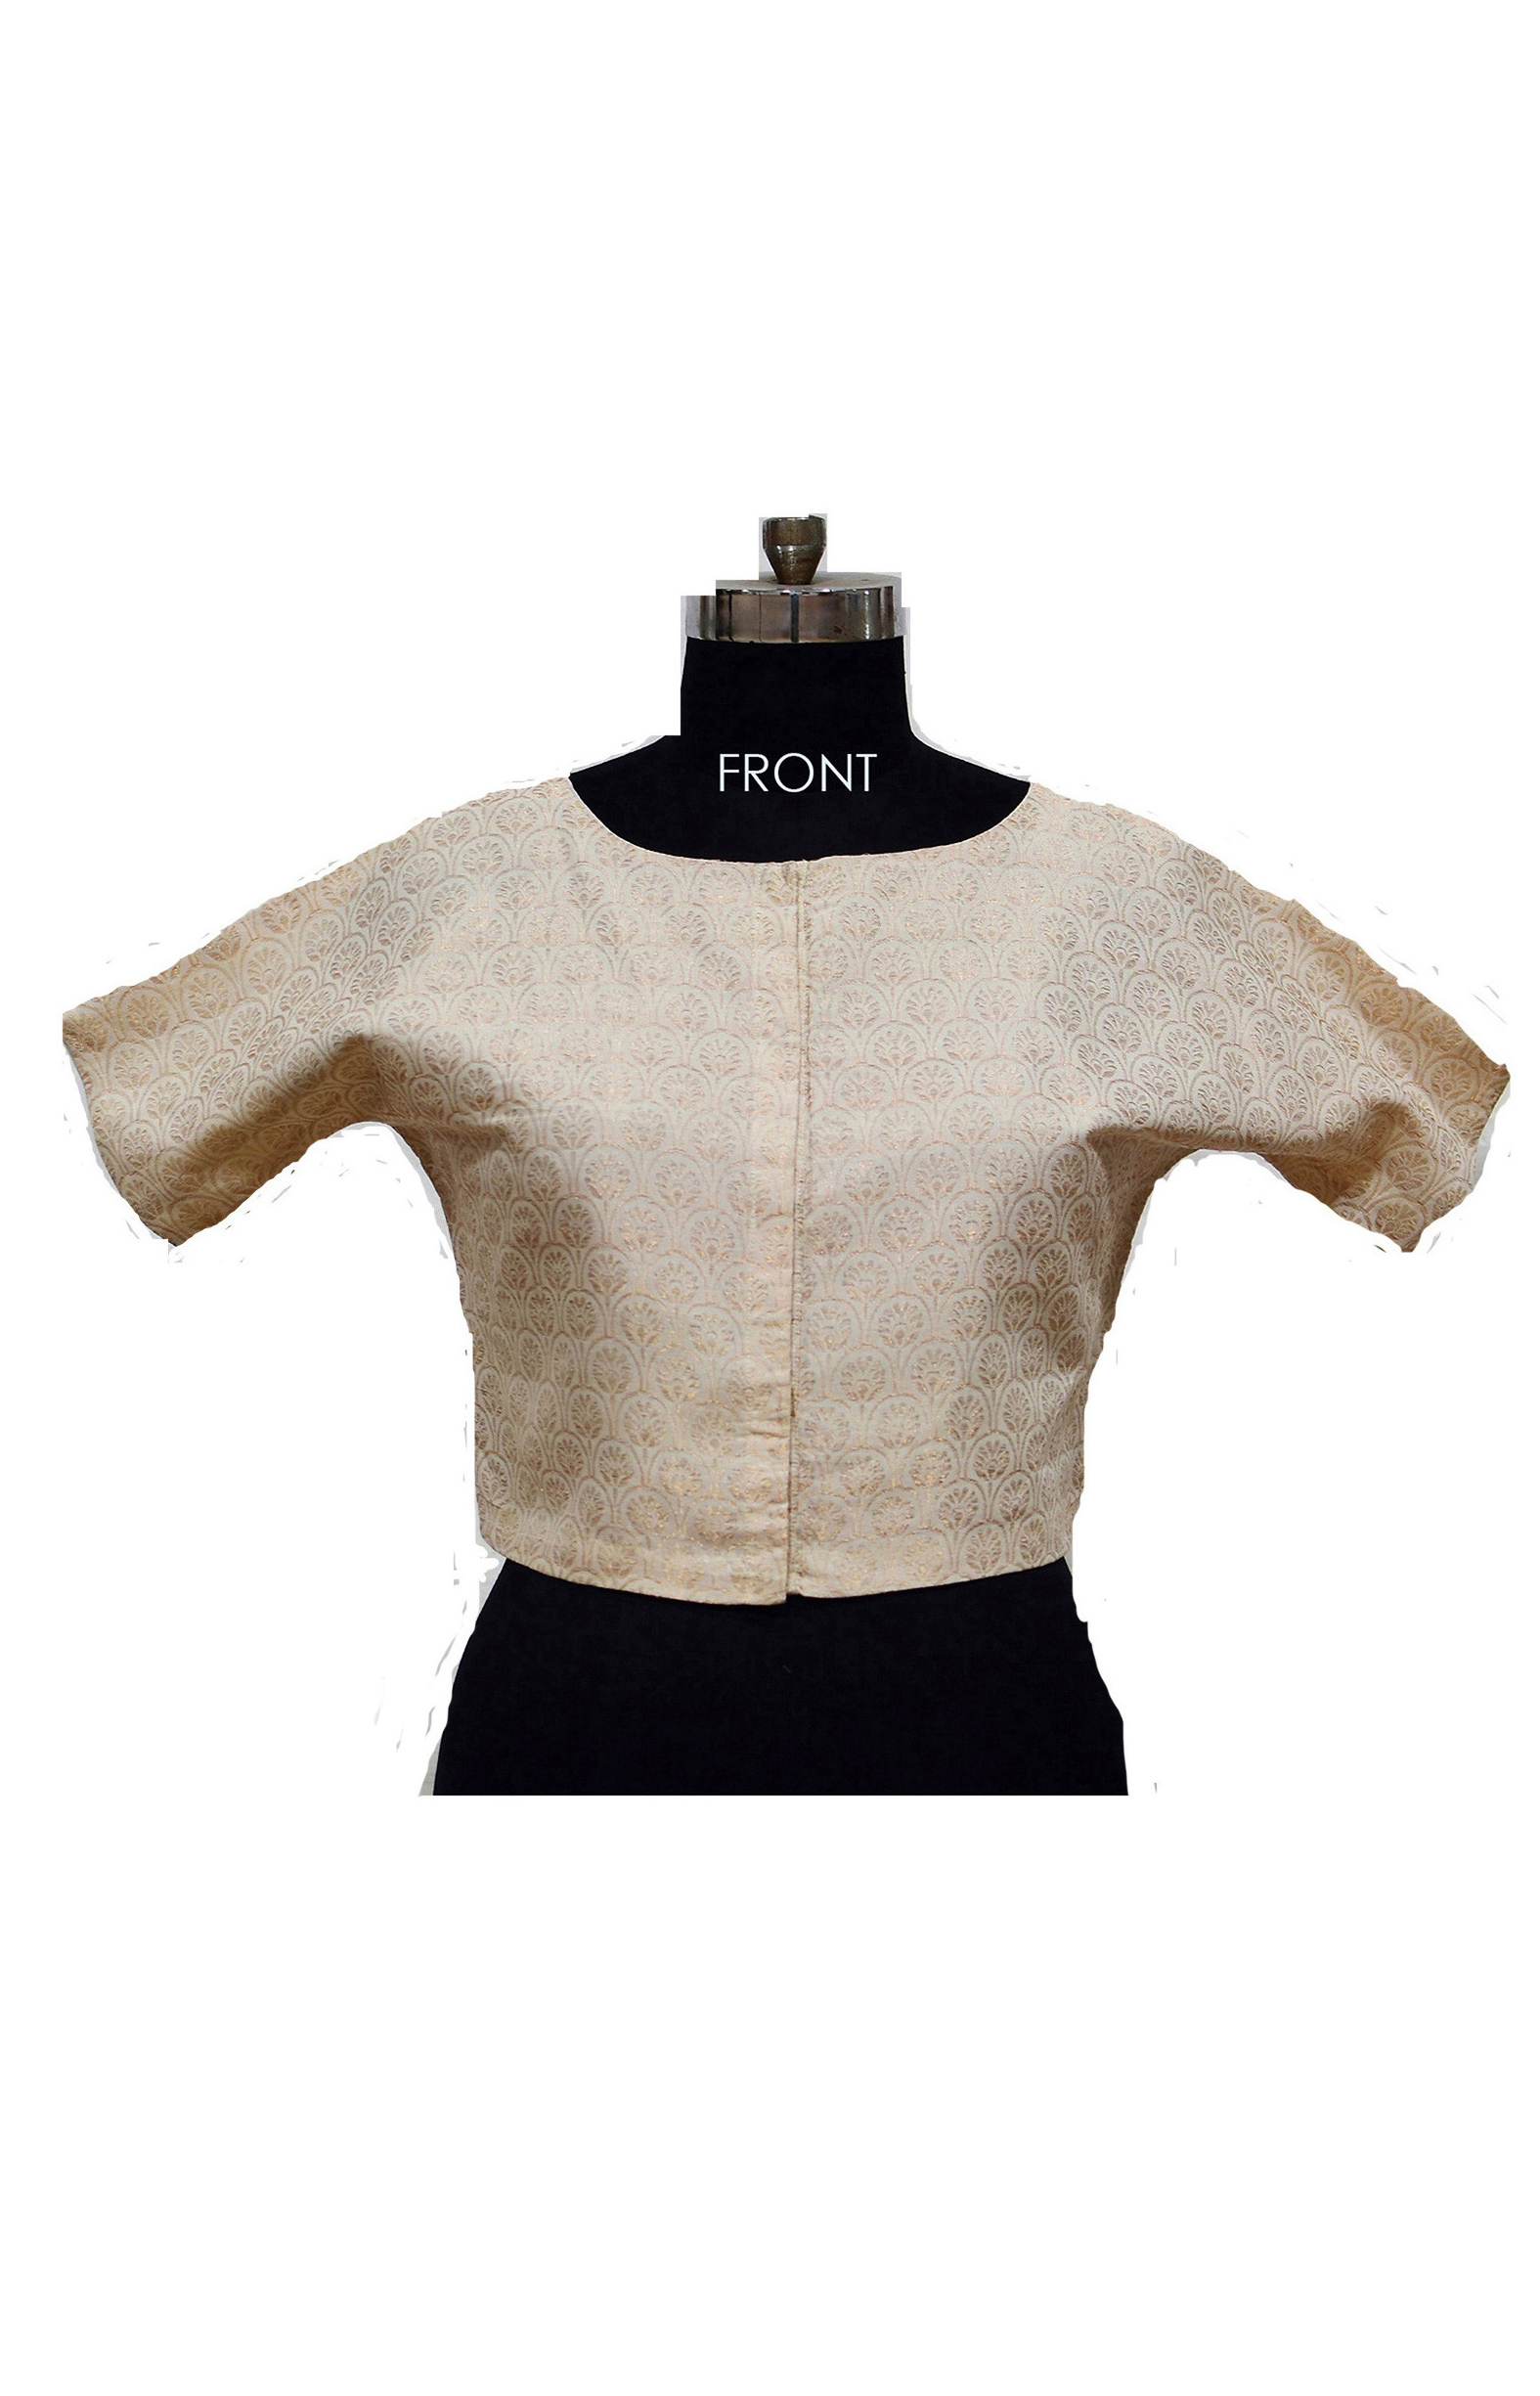 Off-White and Gold,Handloom Organic Cotton Blouse  (Size L / Size 12)